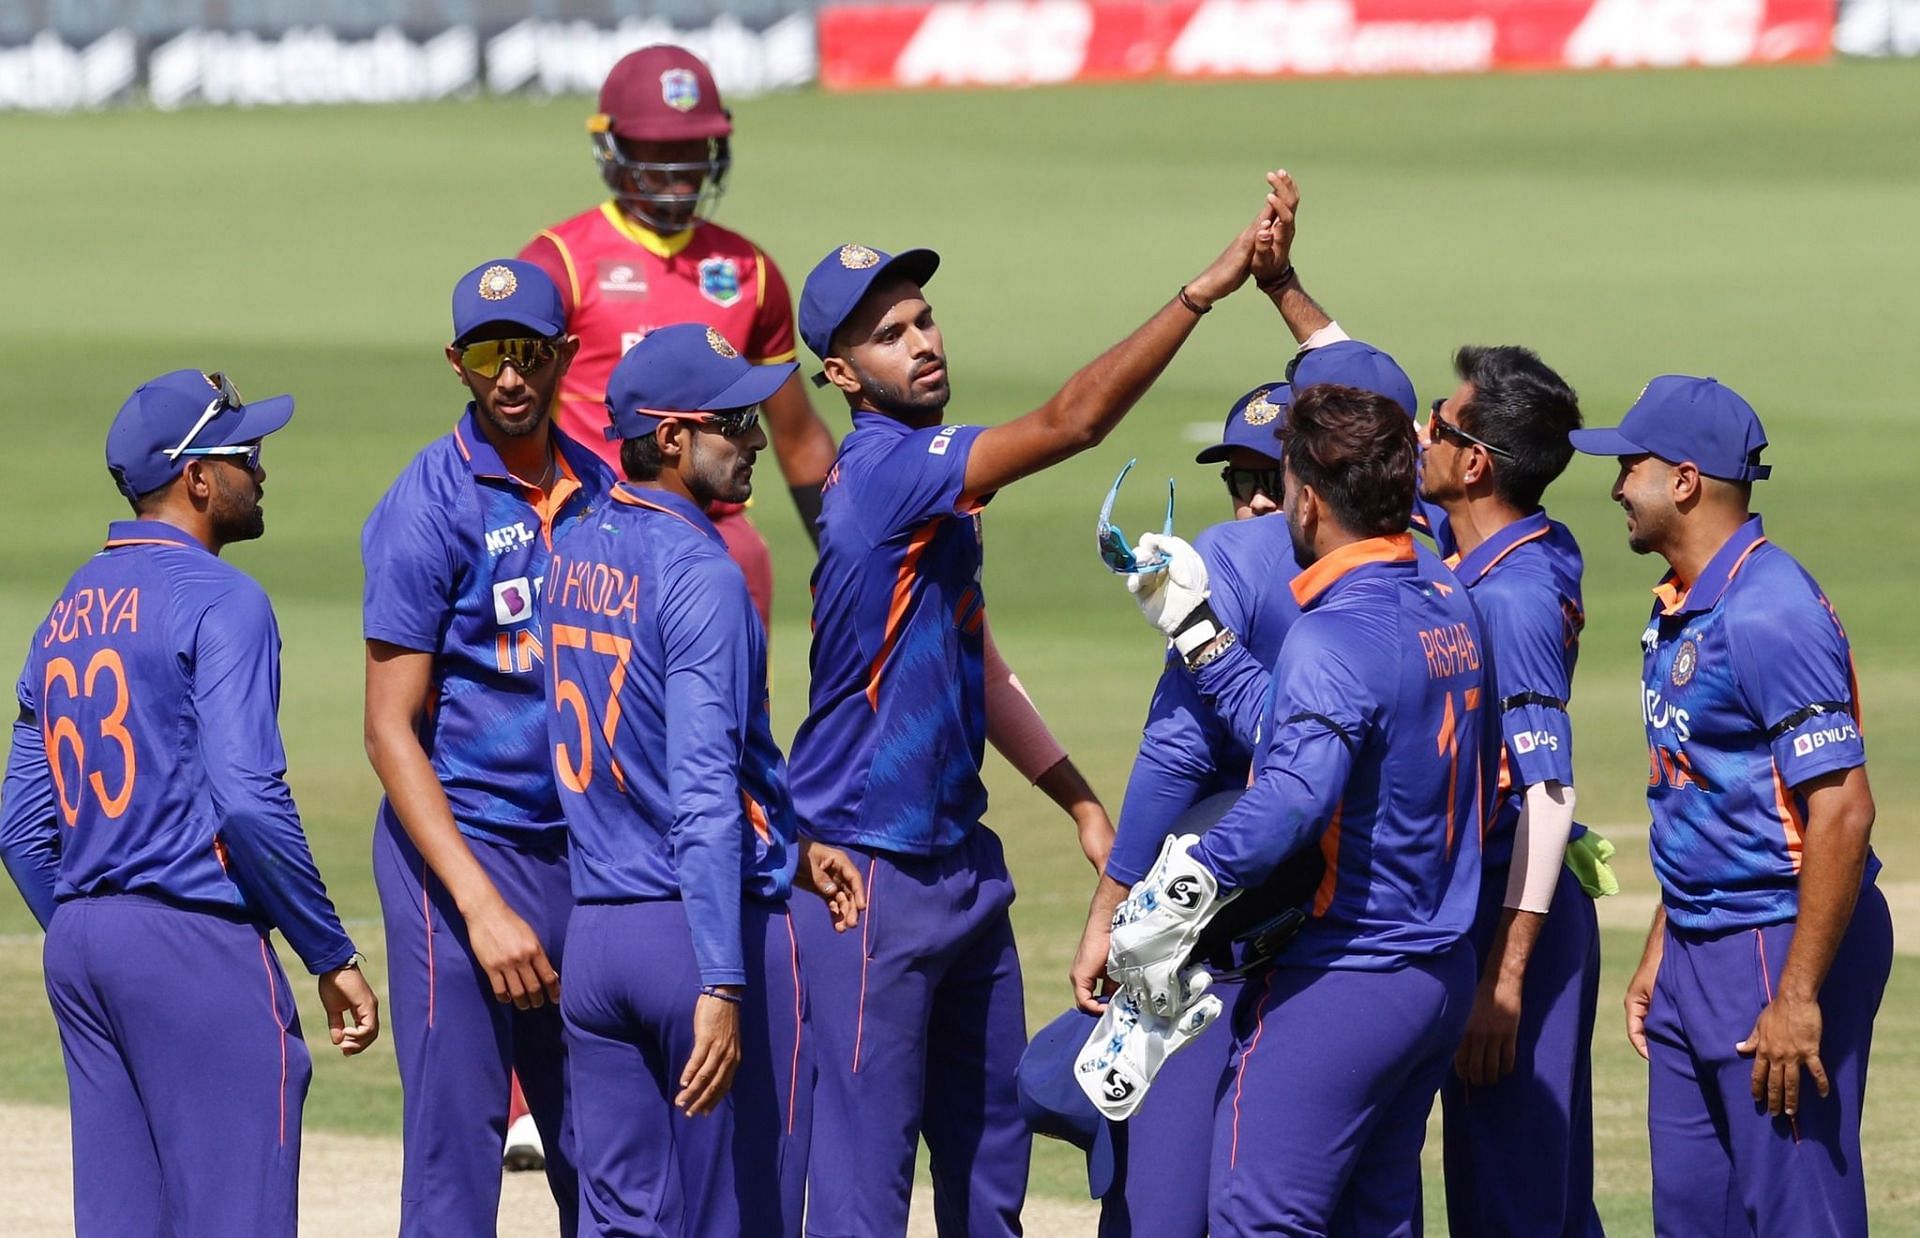 India will battle West Indies in the first ODI of their three-match series on Friday. (Image Courtesy: BCCI)